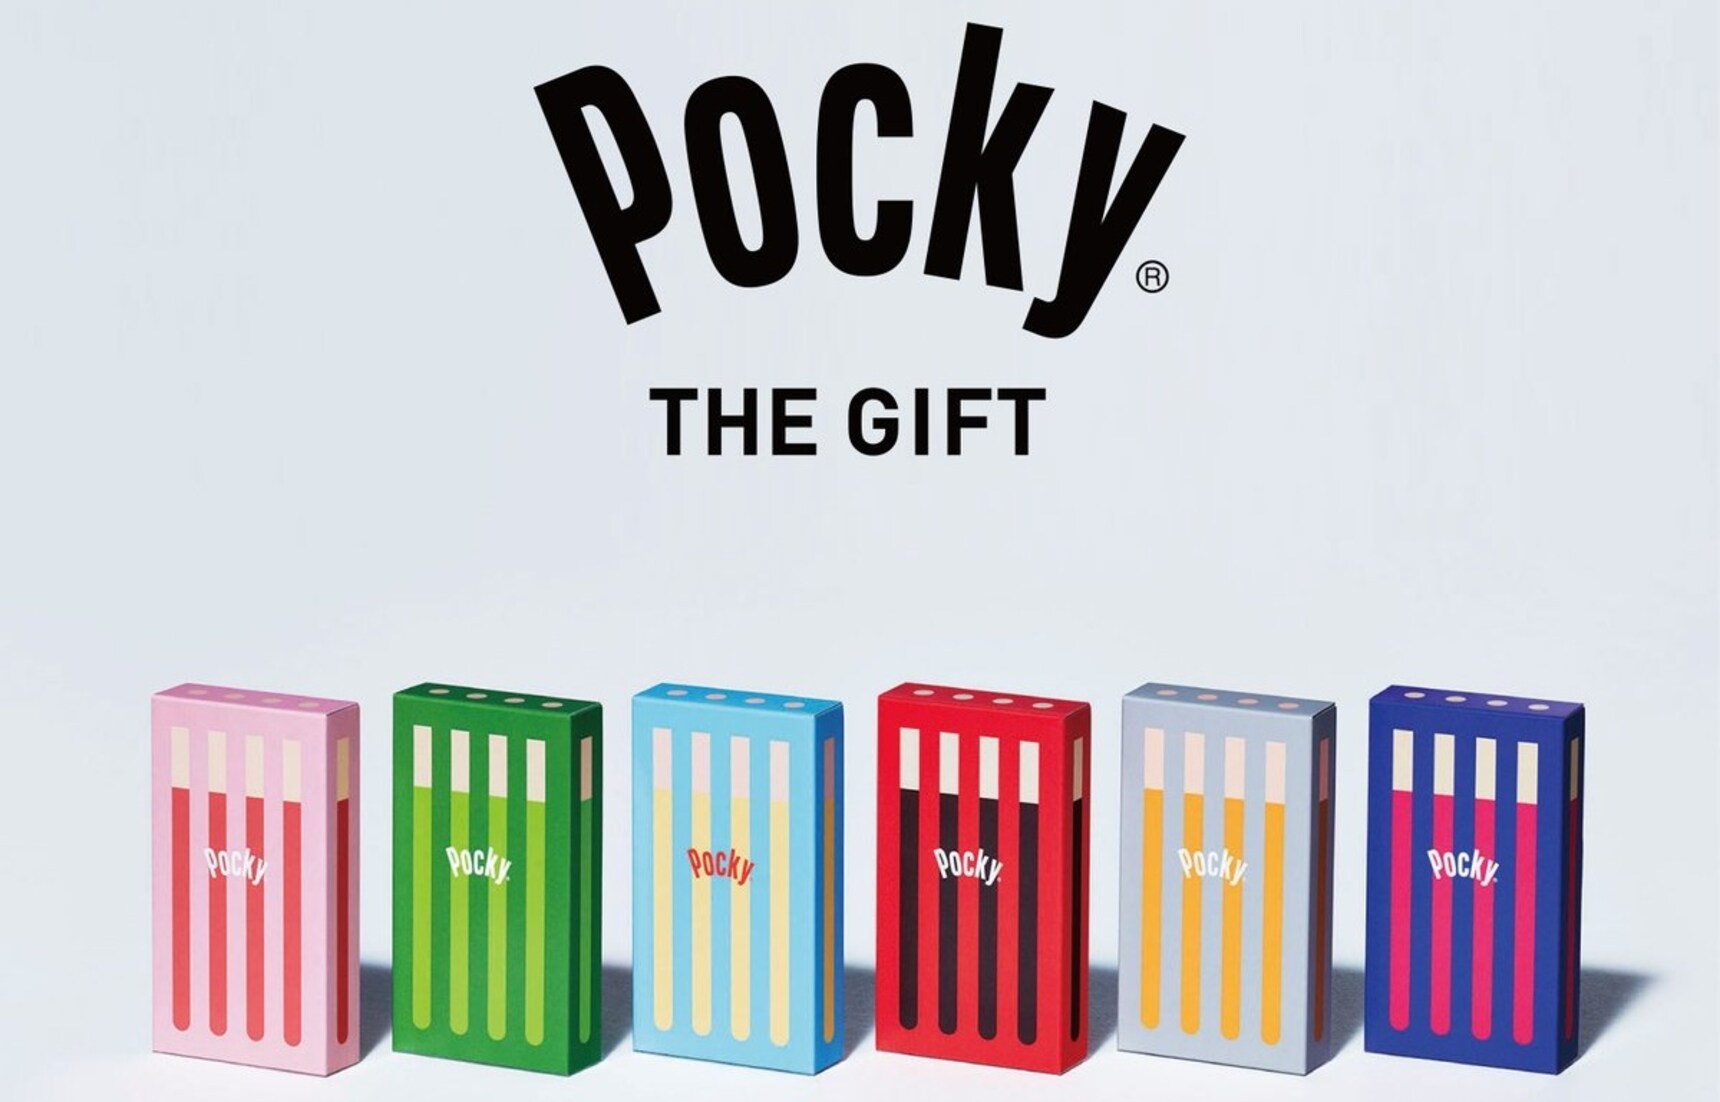 Limited-Time Redesign for Classic Snack, Pocky